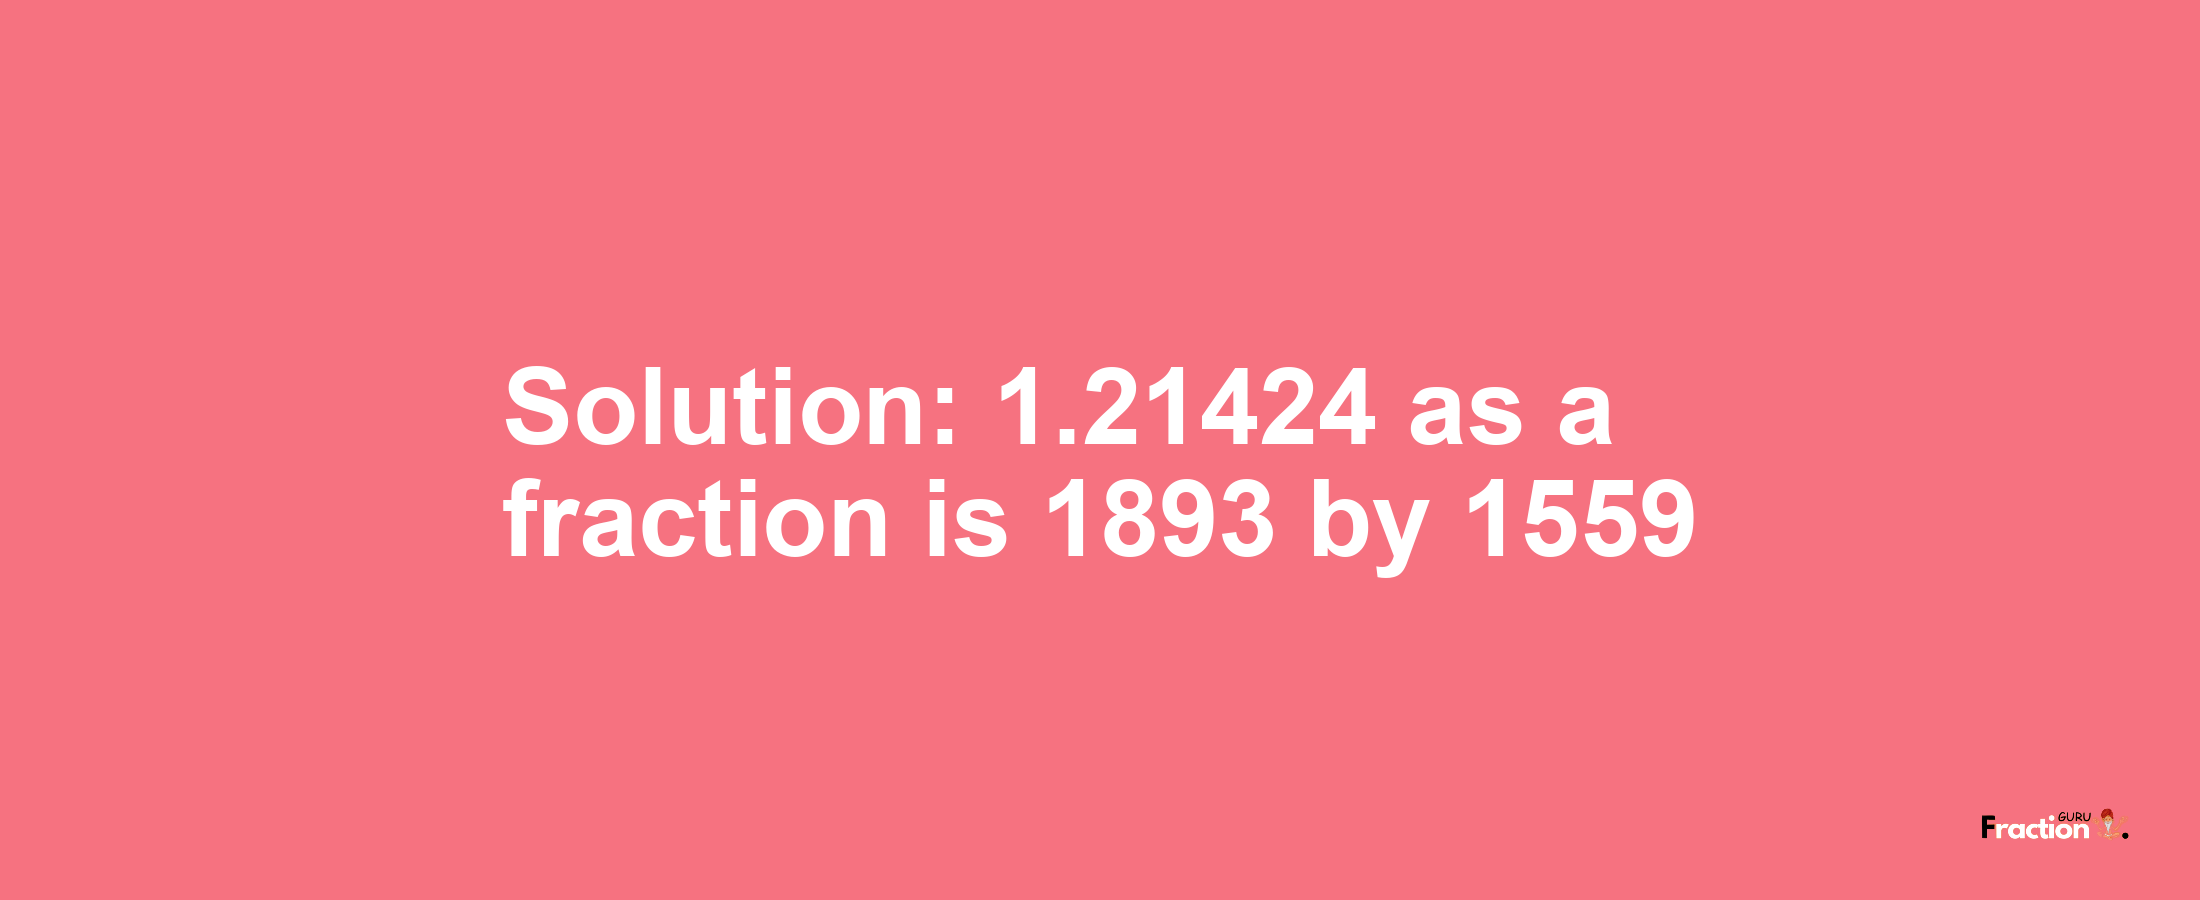 Solution:1.21424 as a fraction is 1893/1559